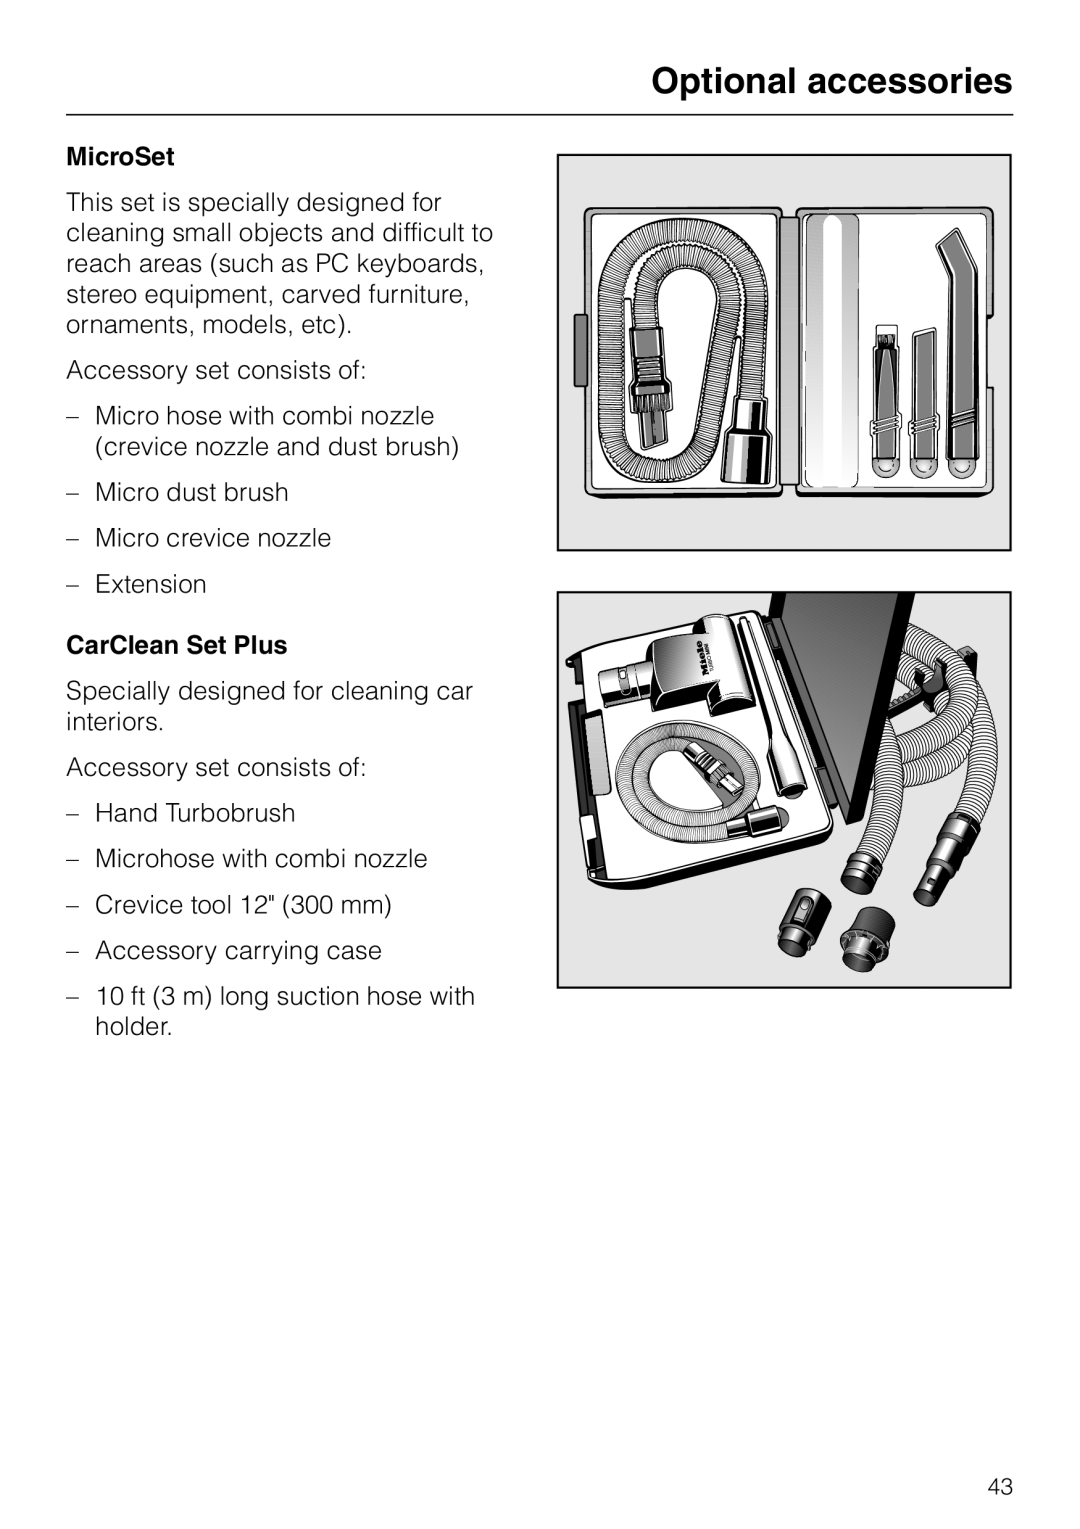 Miele S 5000 operating instructions Optional accessories, MicroSet, CarClean Set Plus 